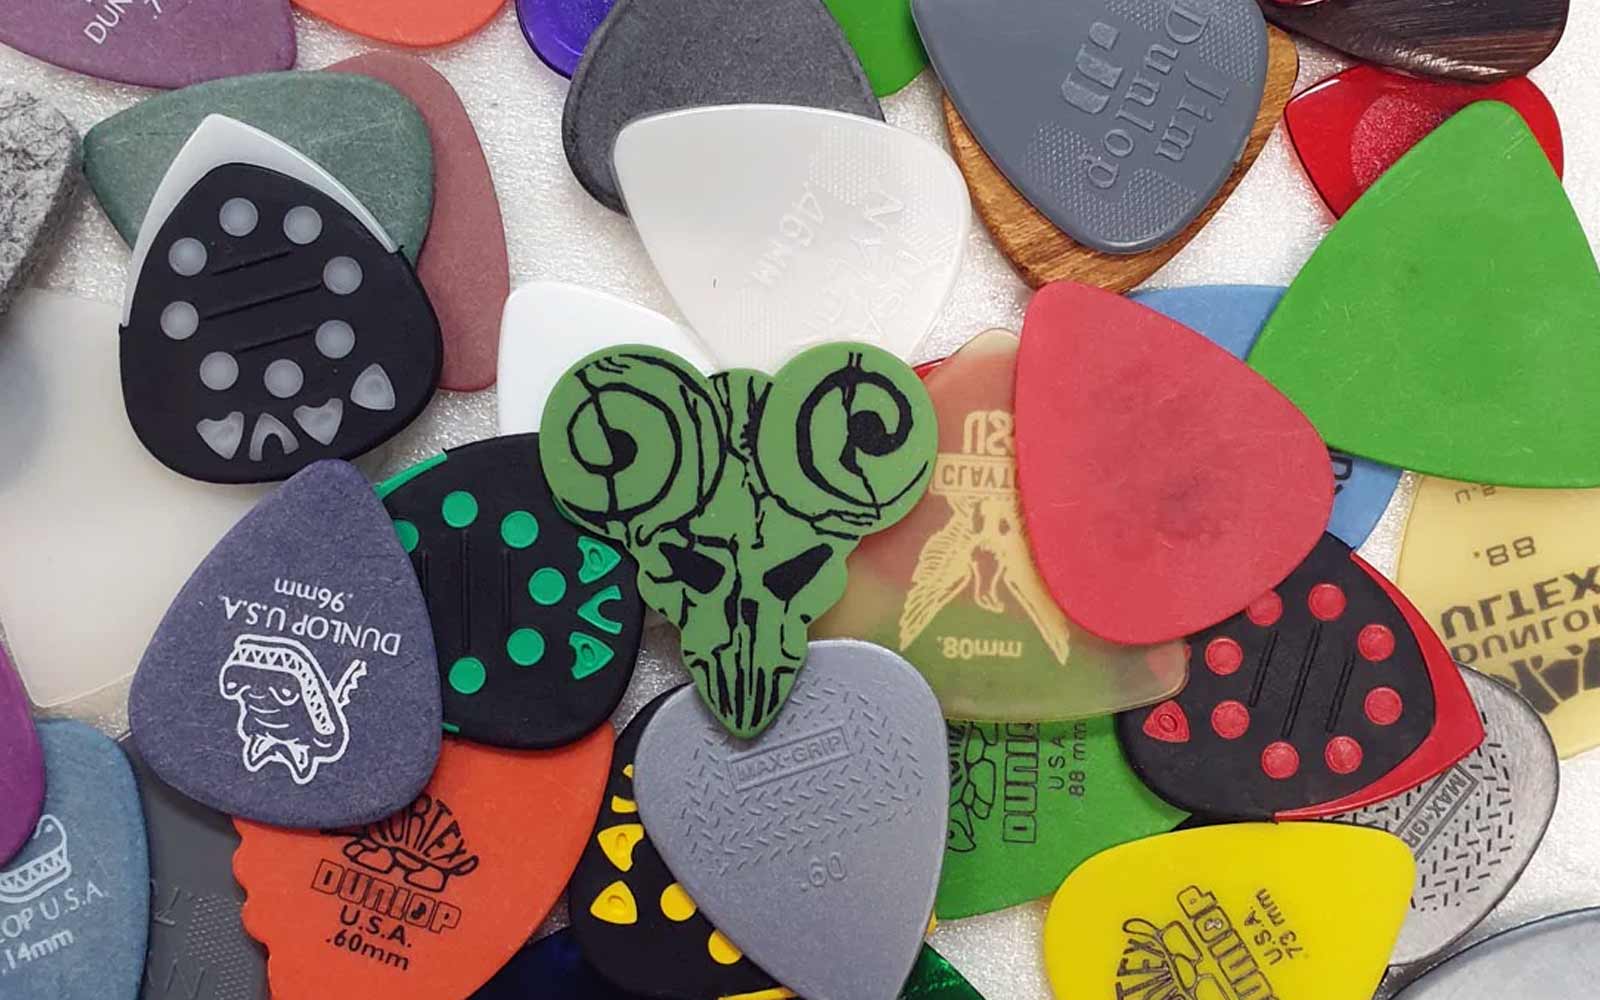 why are guitar picks different thicknesses